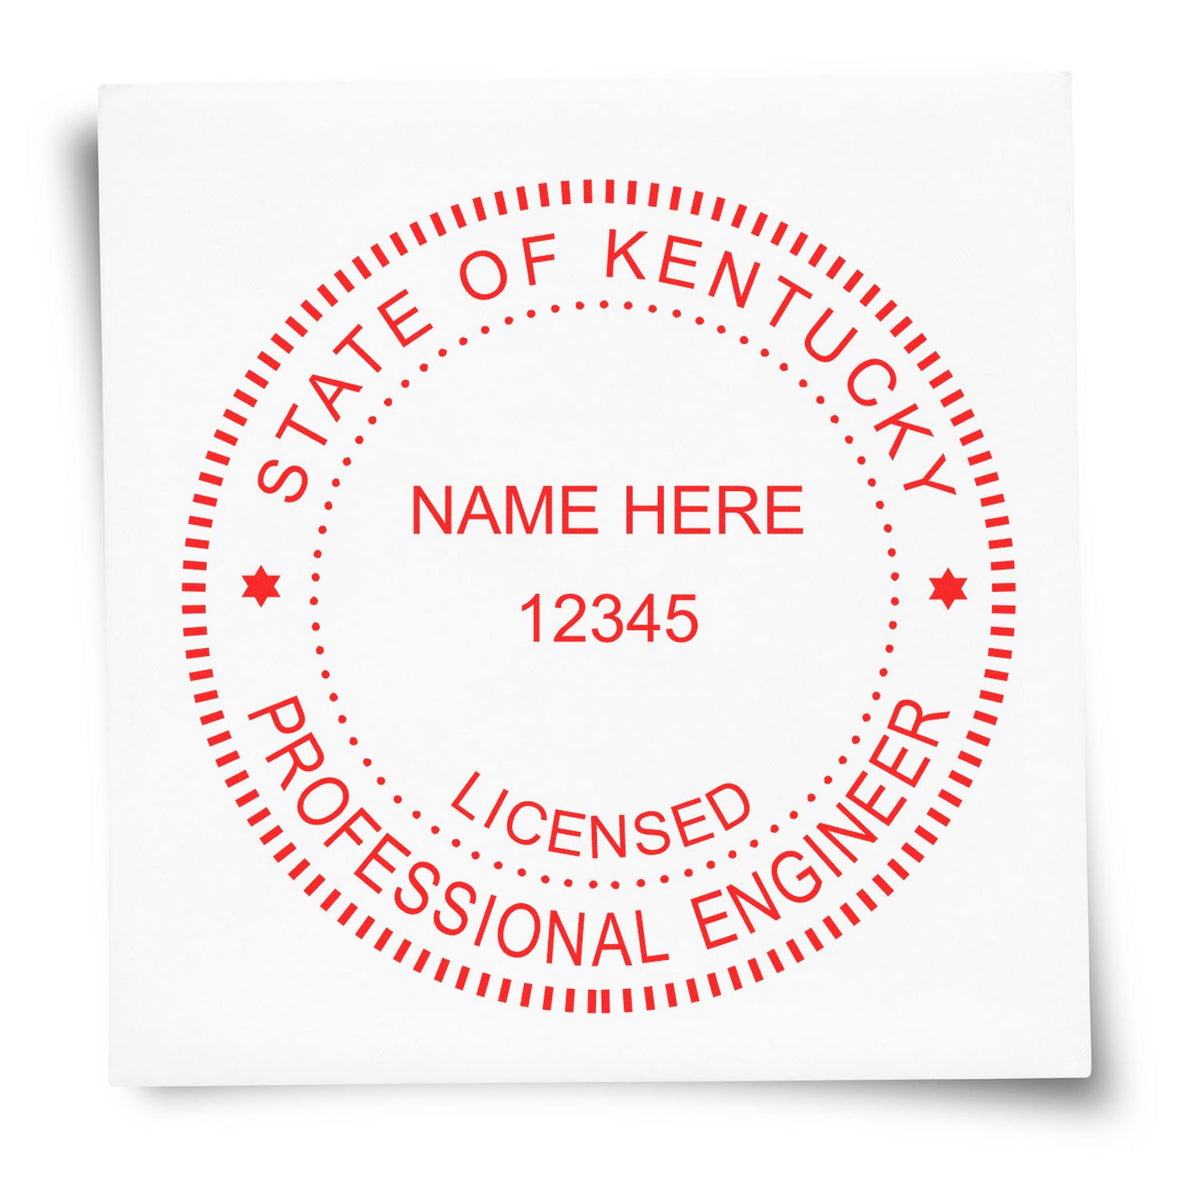 A photograph of the Premium MaxLight Pre-Inked Kentucky Engineering Stamp stamp impression reveals a vivid, professional image of the on paper.